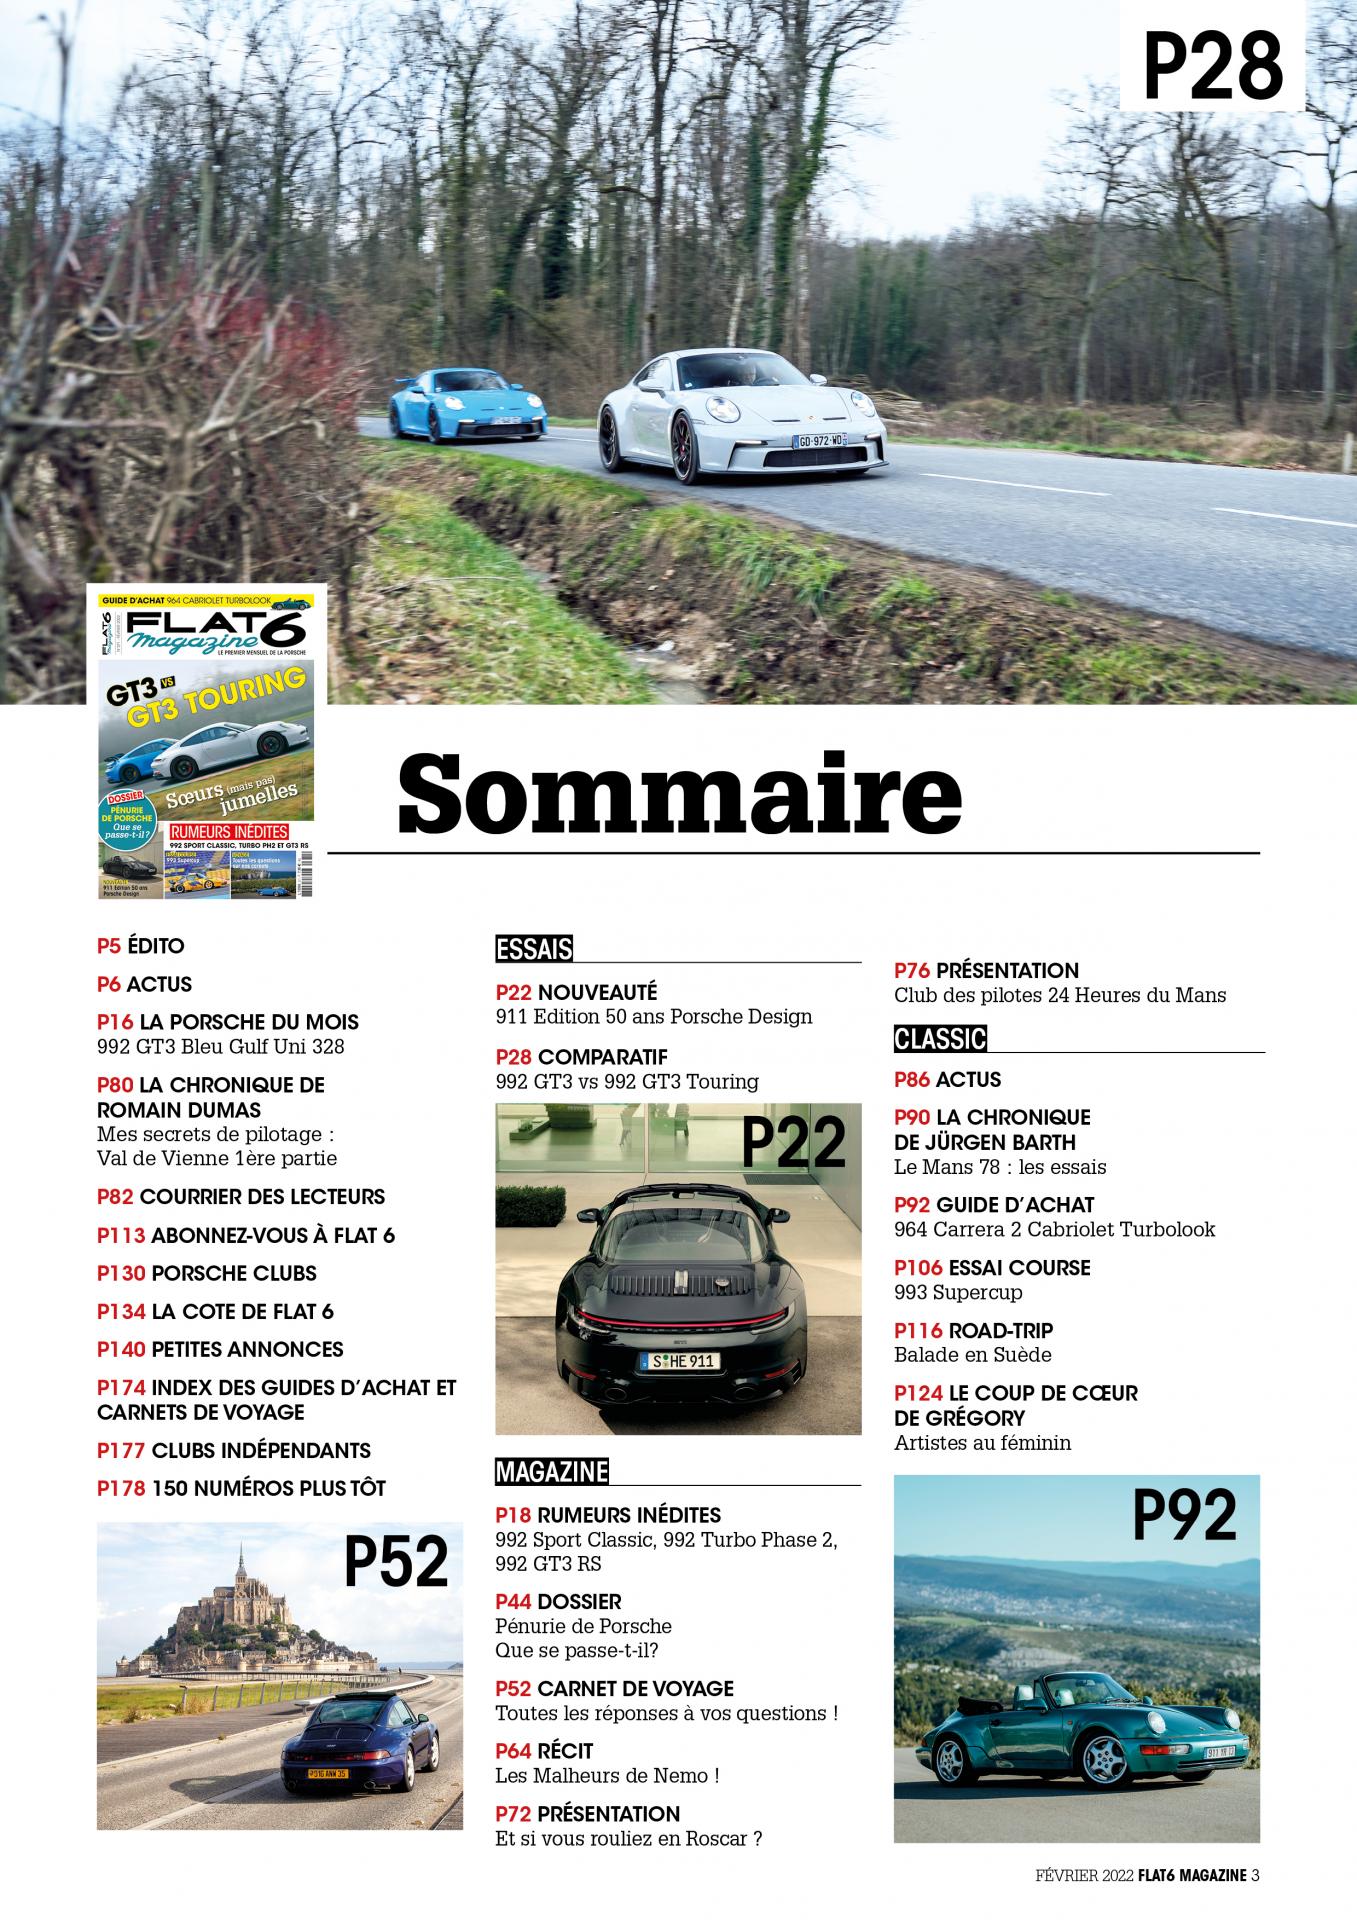 Sommaire371